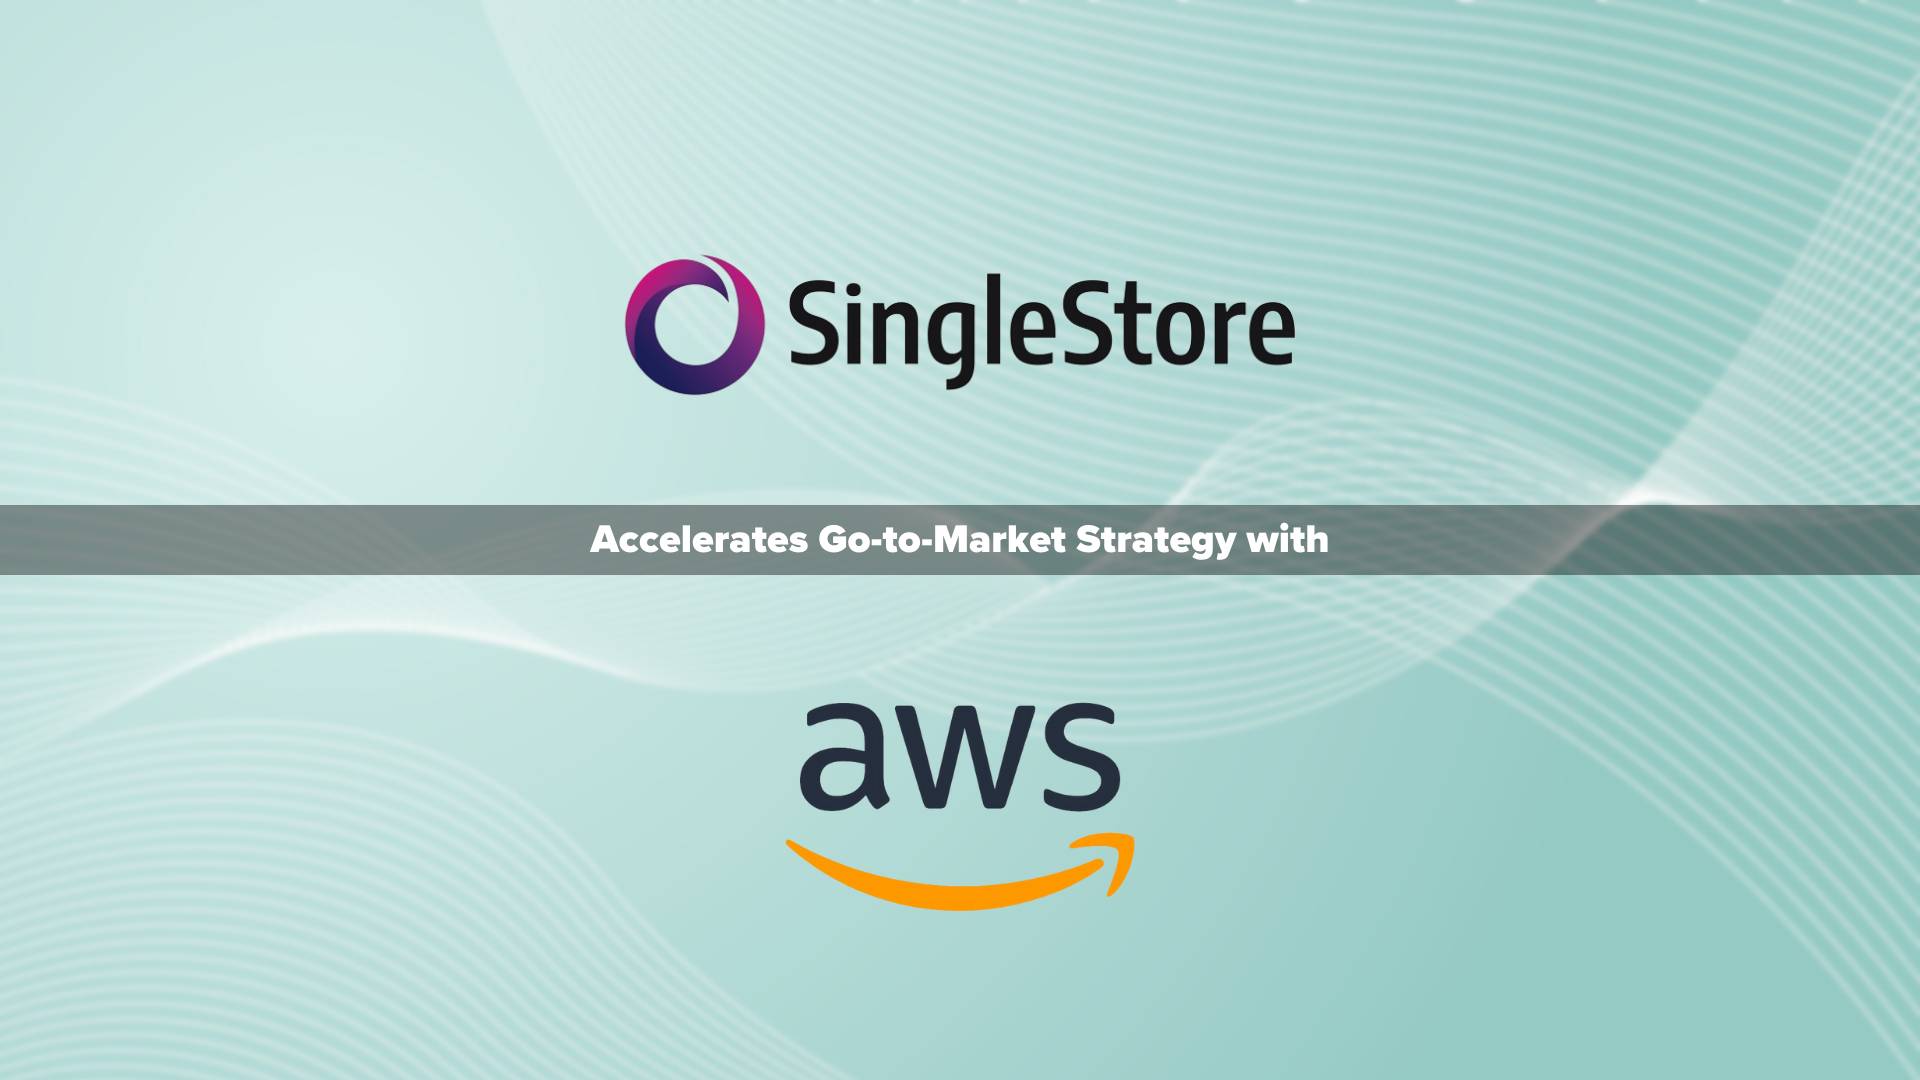 SingleStore Accelerates Go-to-Market Strategy with AWS